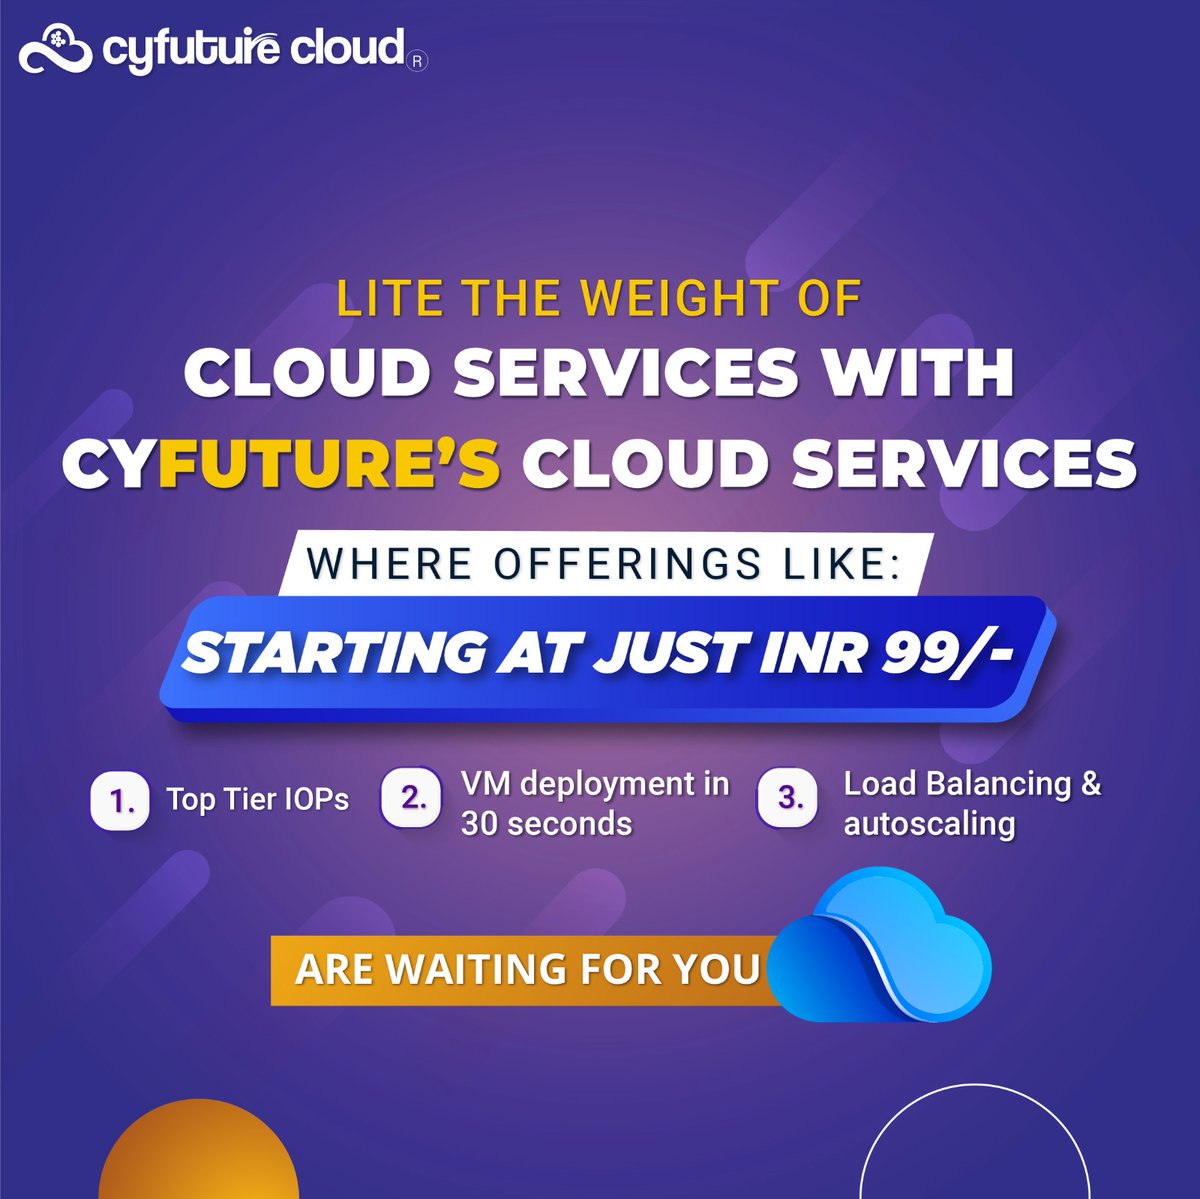 Explore the efficiency of lite cloud services with Cyfuture Cloud to propel your business forward.

Contact us today at Cyfuture.cloud to improve performance and efficiency for your projects.

#security #cloudhosting #cloudhostingsolution #cloud #cloudhosting